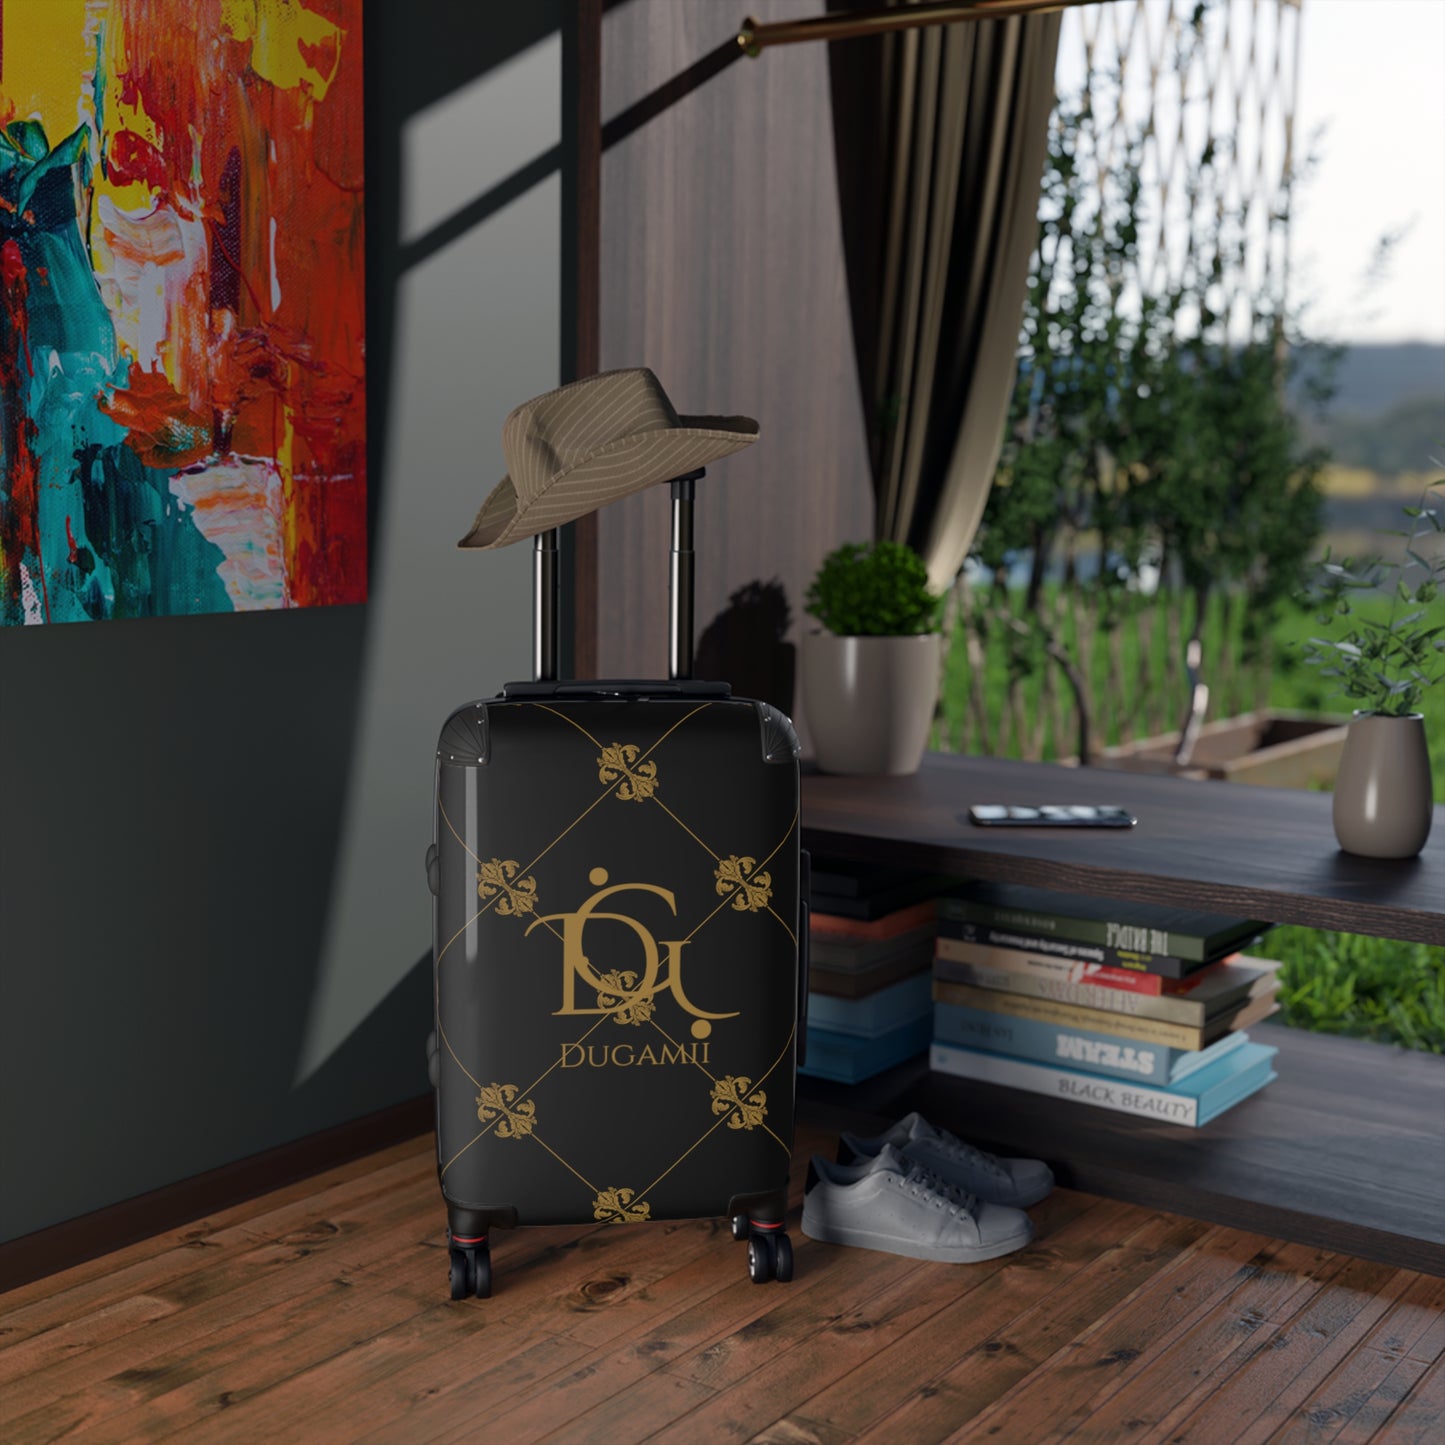 DuGamii Luxury Carry Suitcase With Wheels and Security Lock